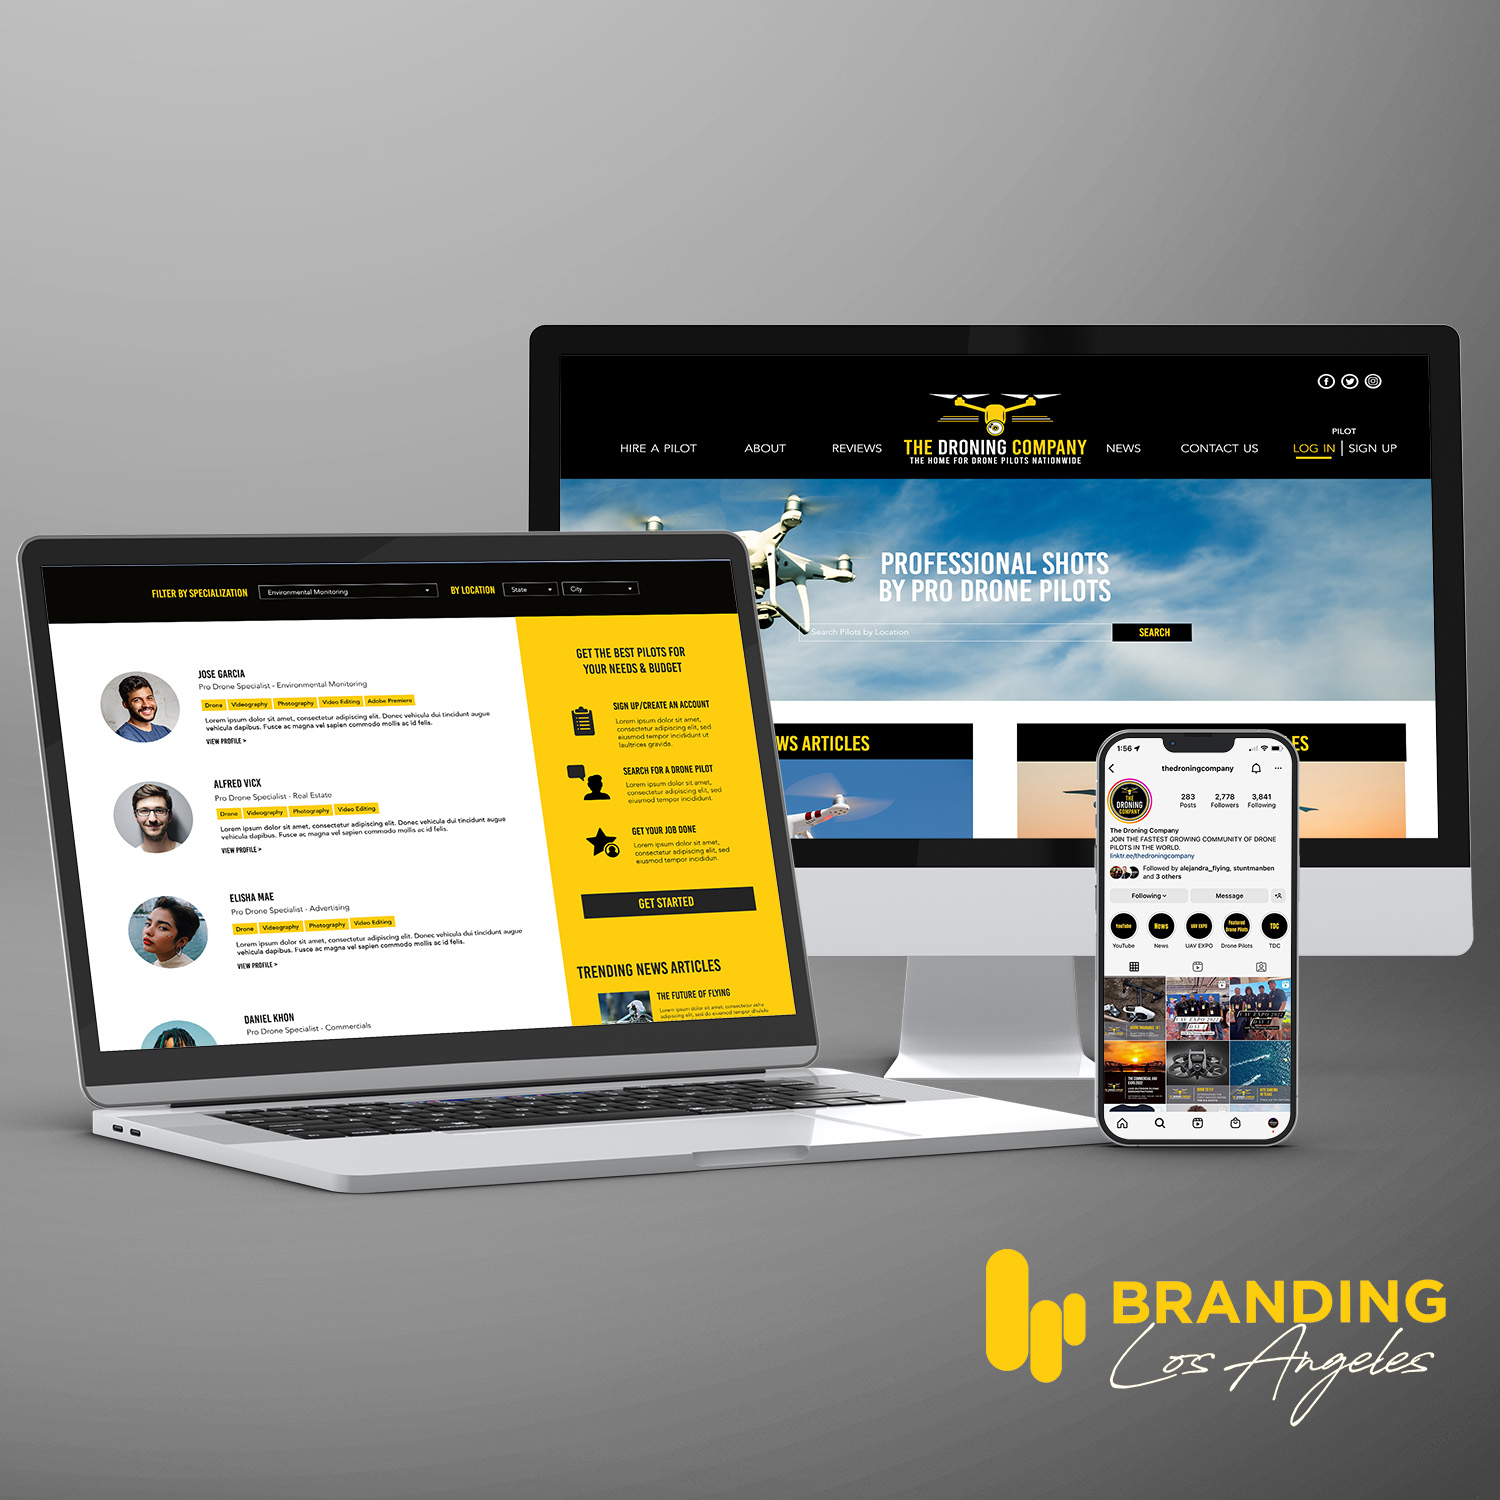 Branding Los Angeles - The Droning Company